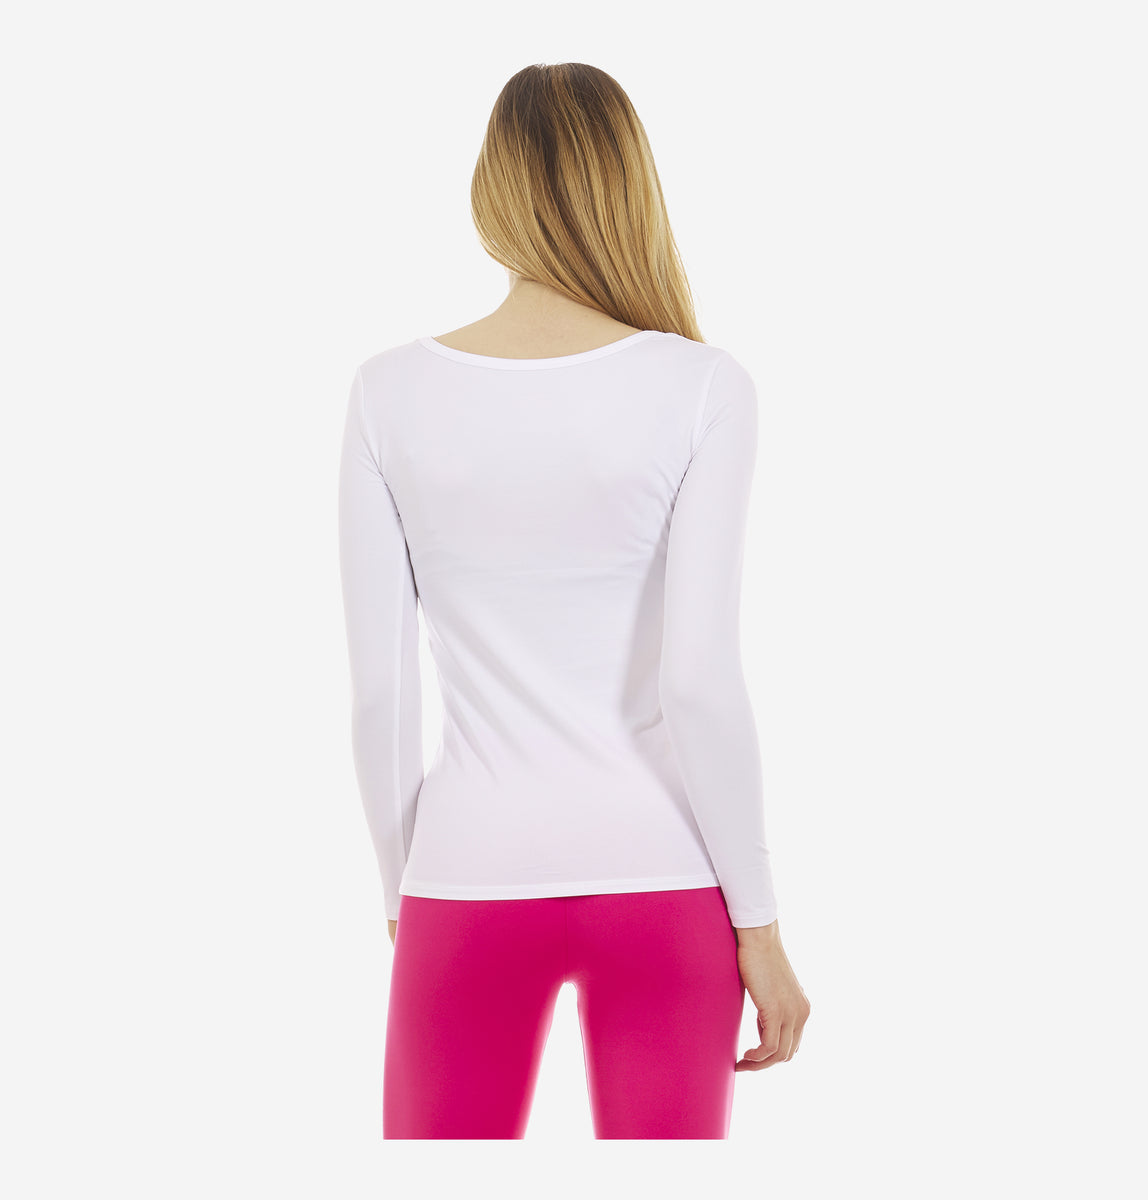 Women's Scoop Thermal Tops: Free Shipping (US) Returns & Exchanges